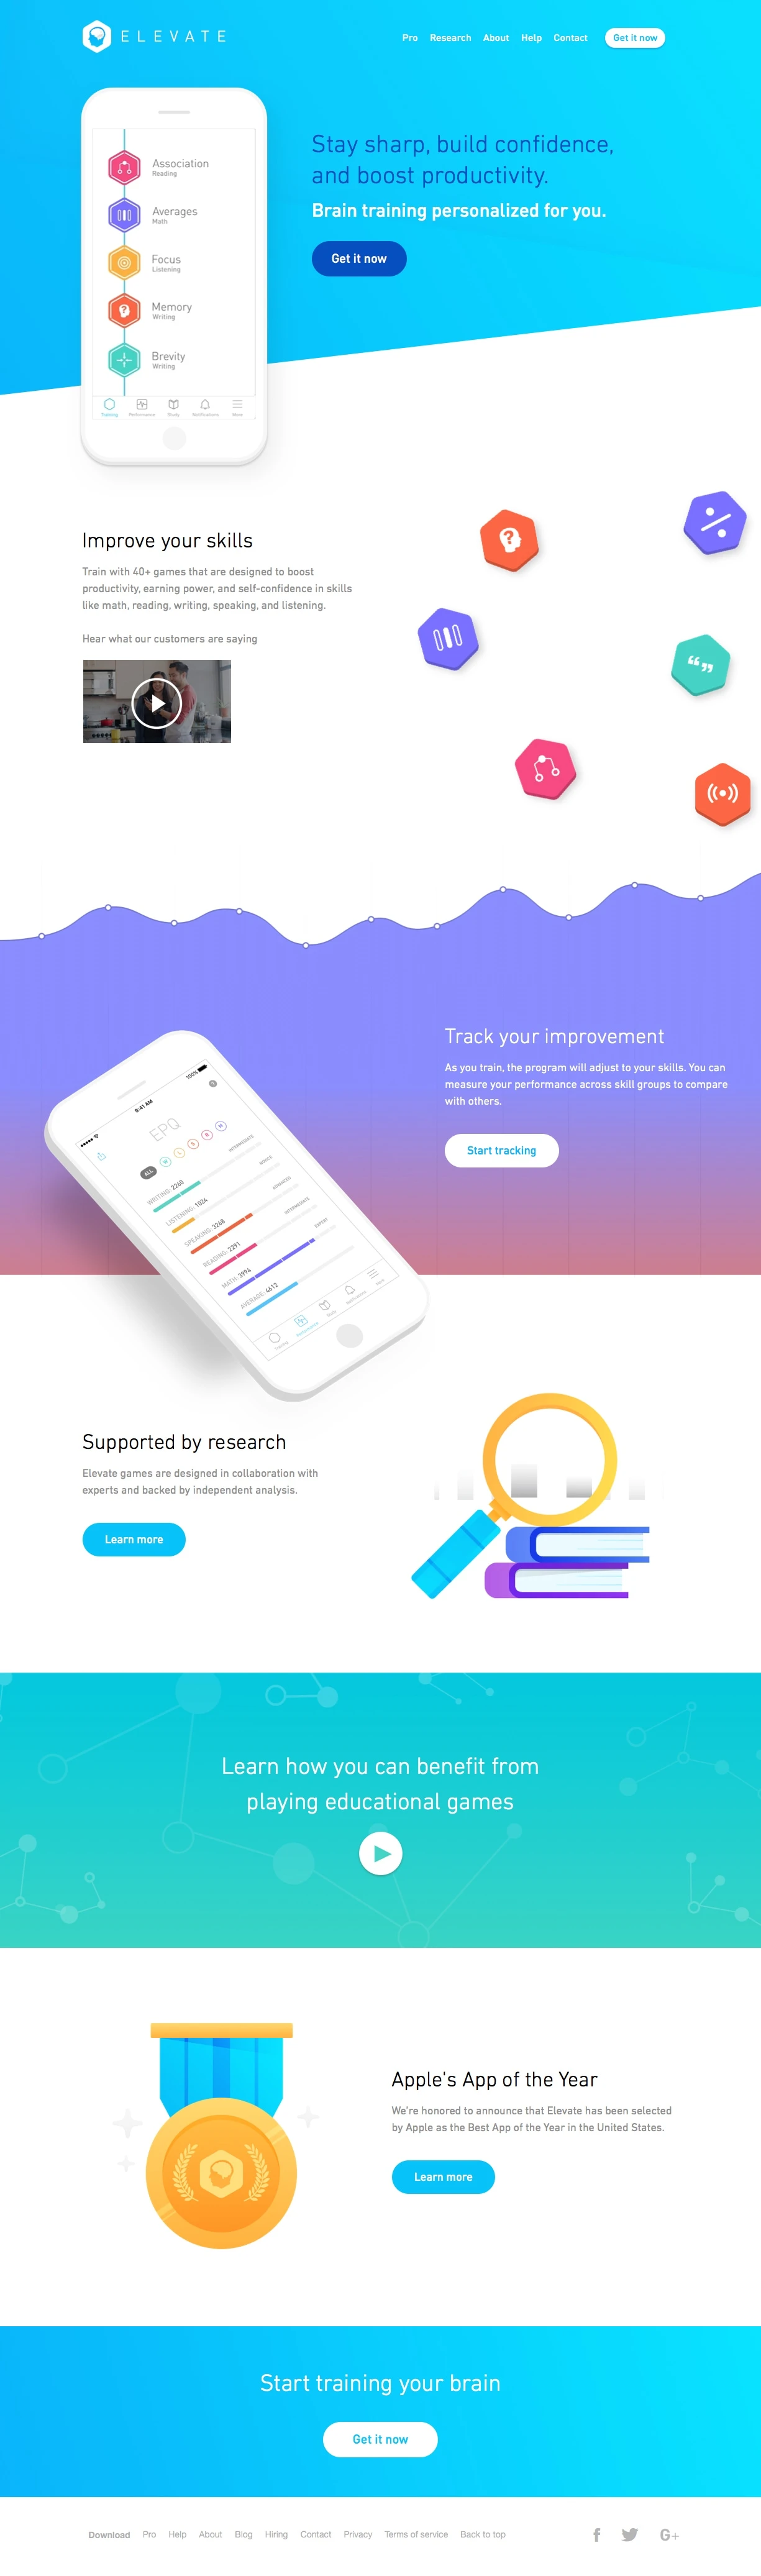 Elevate Landing Page Example: Elevate is a brain training app designed to help you stay sharp, build confidence, and boost productivity. Selected as App of the Year by Apple.